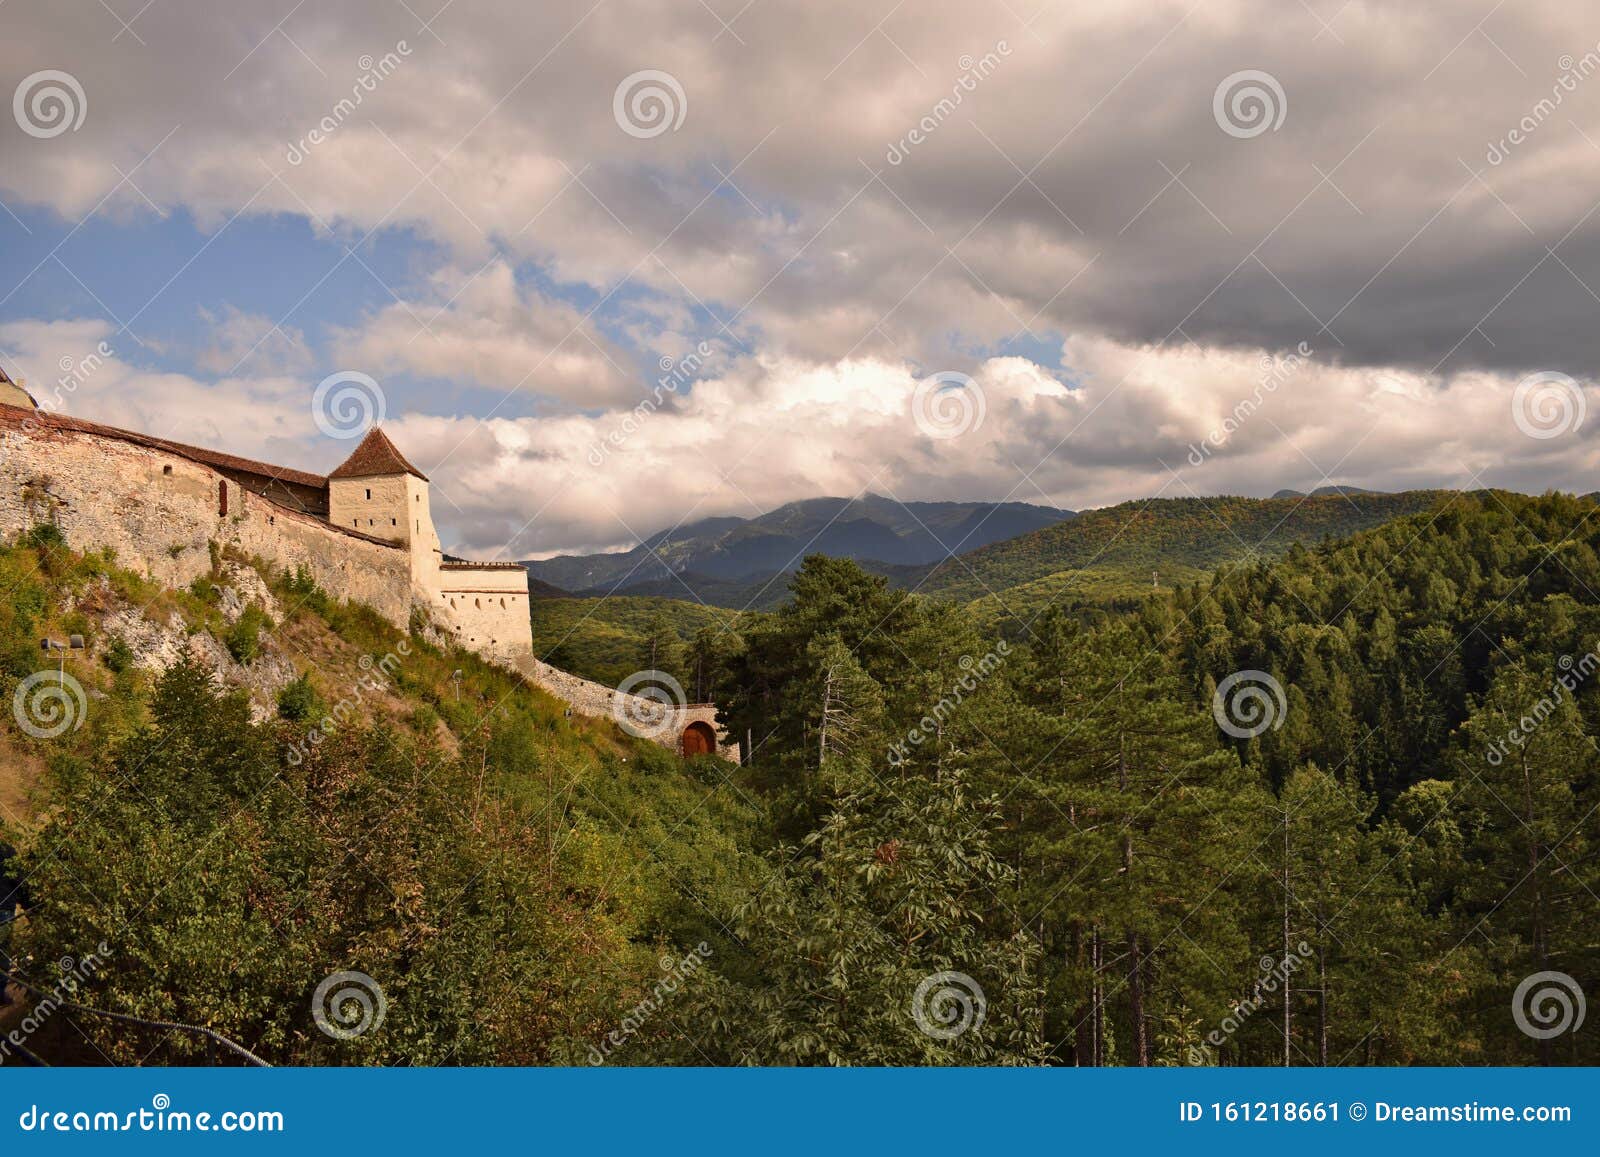 castle surrounded by the forest in rumania